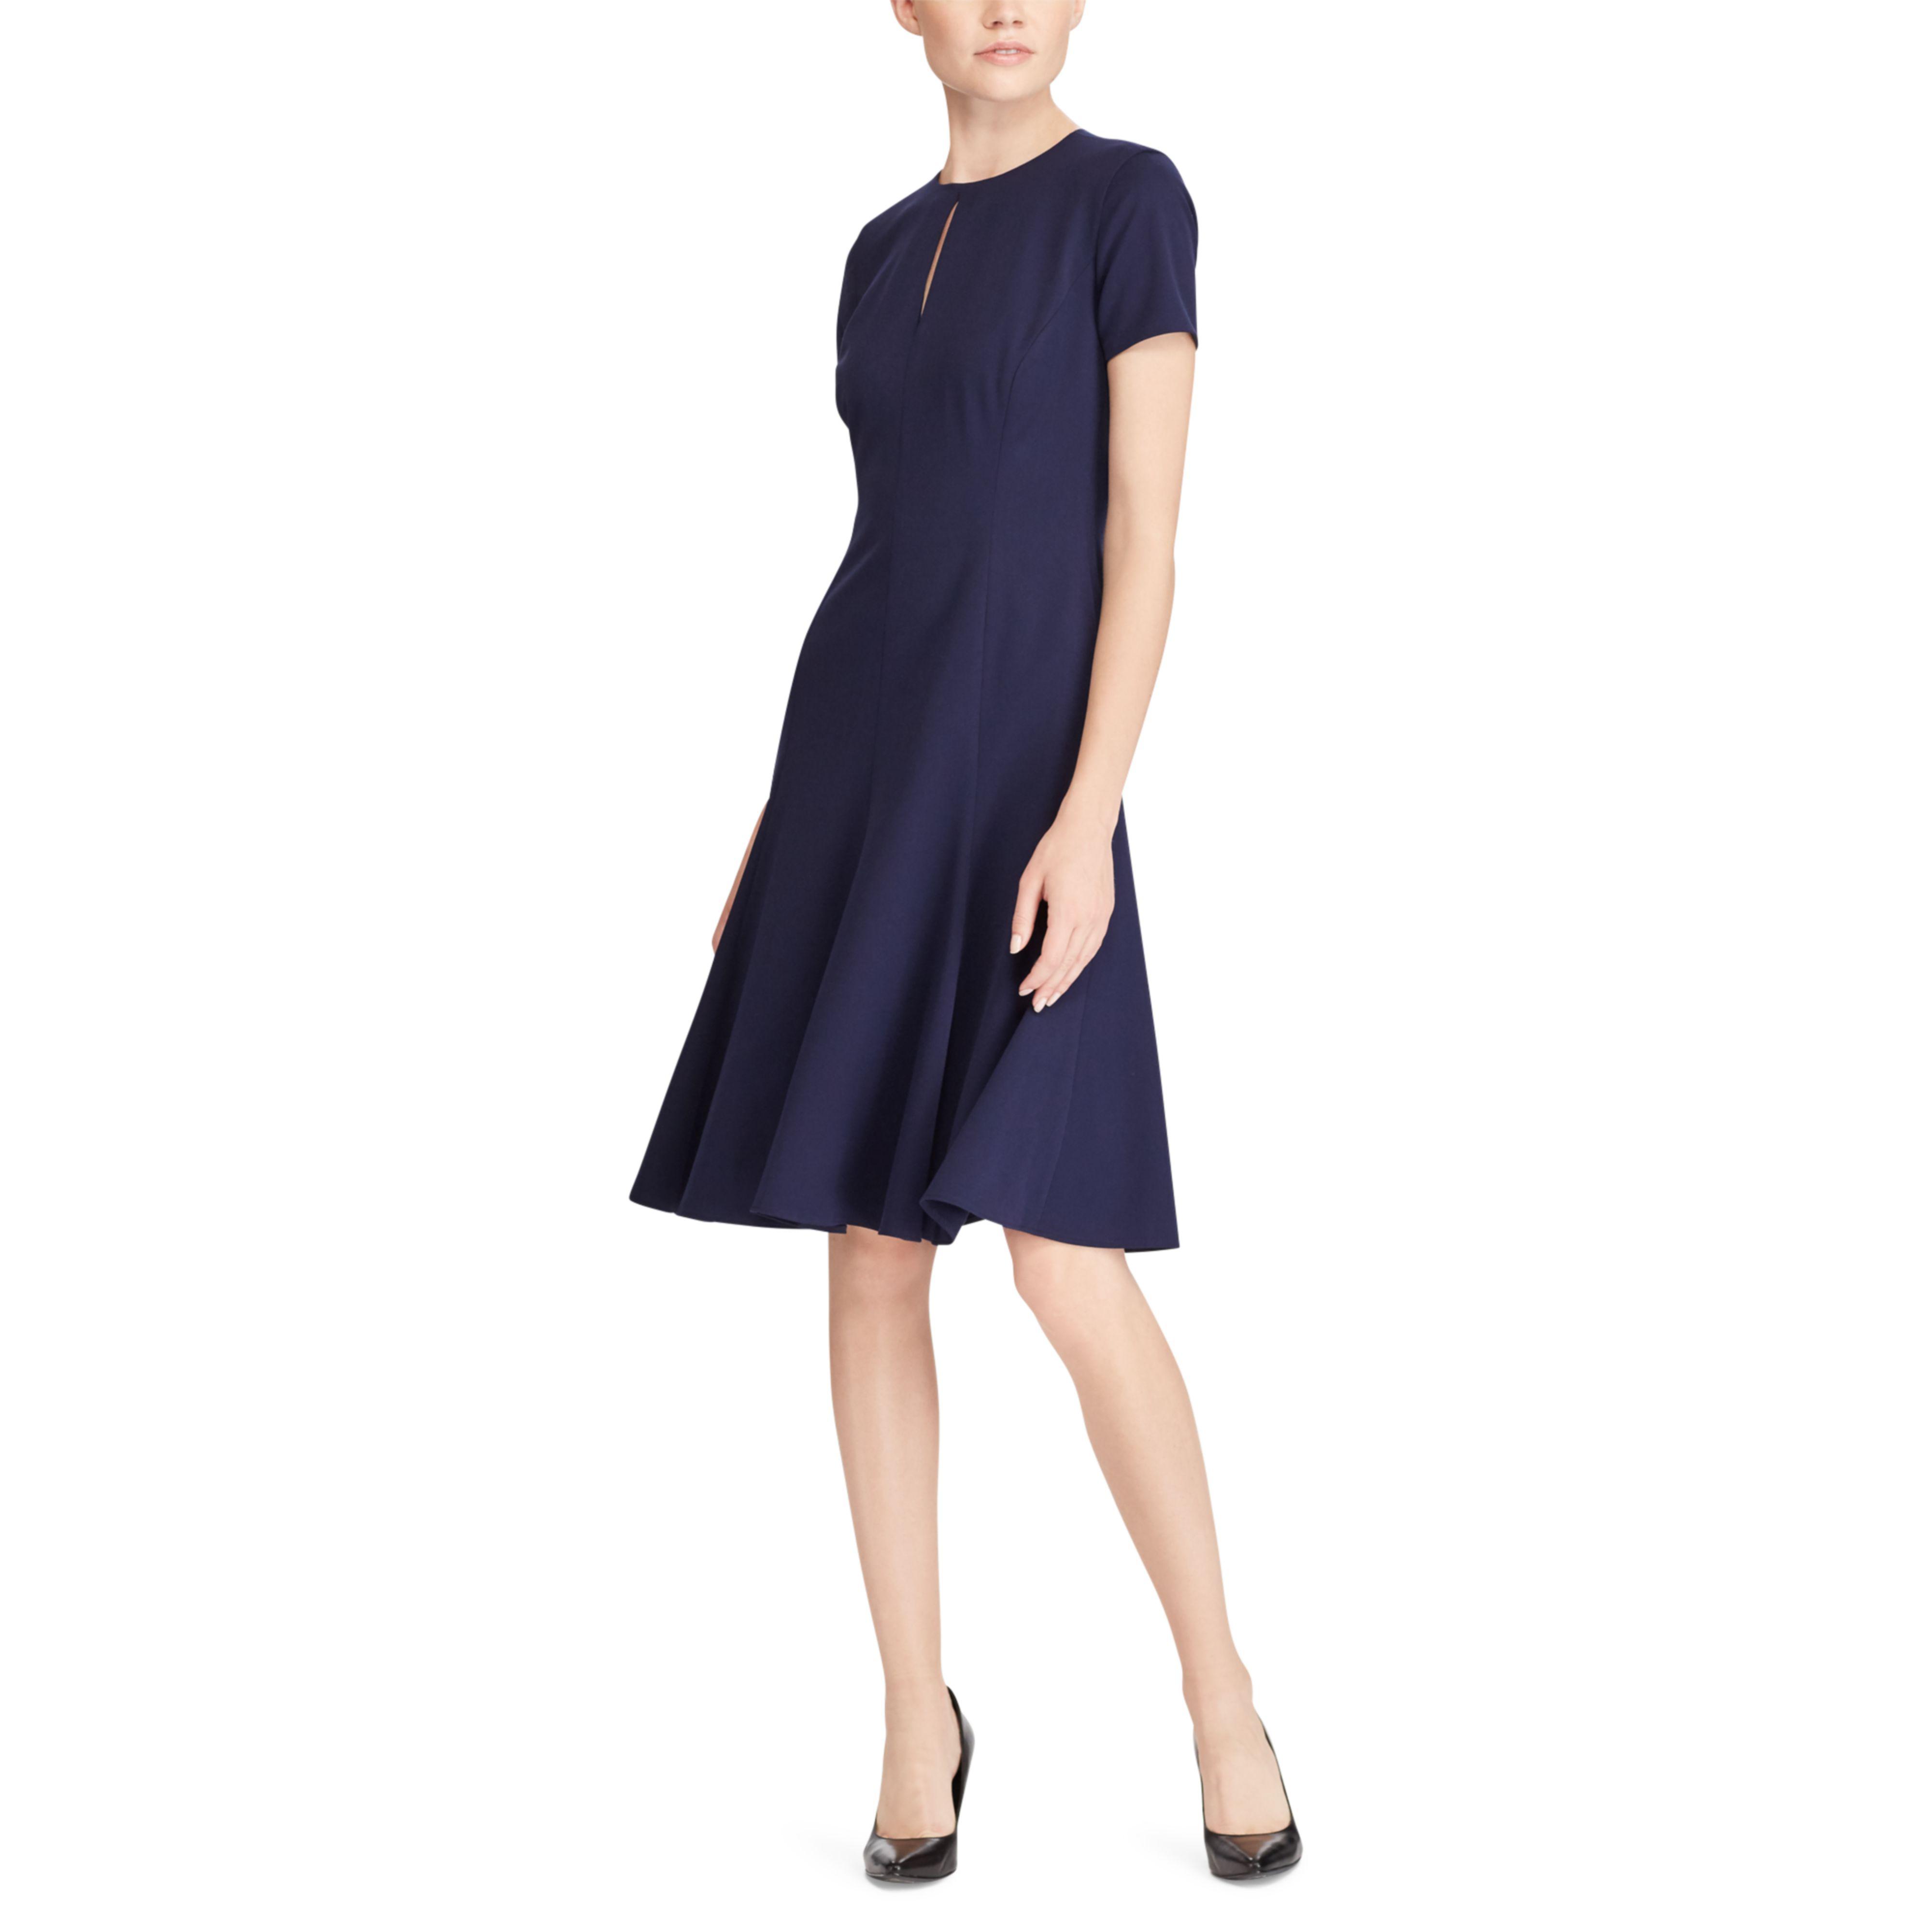 Ralph Lauren Synthetic Keyhole Fit-and-flare Dress in Navy (Blue) - Lyst